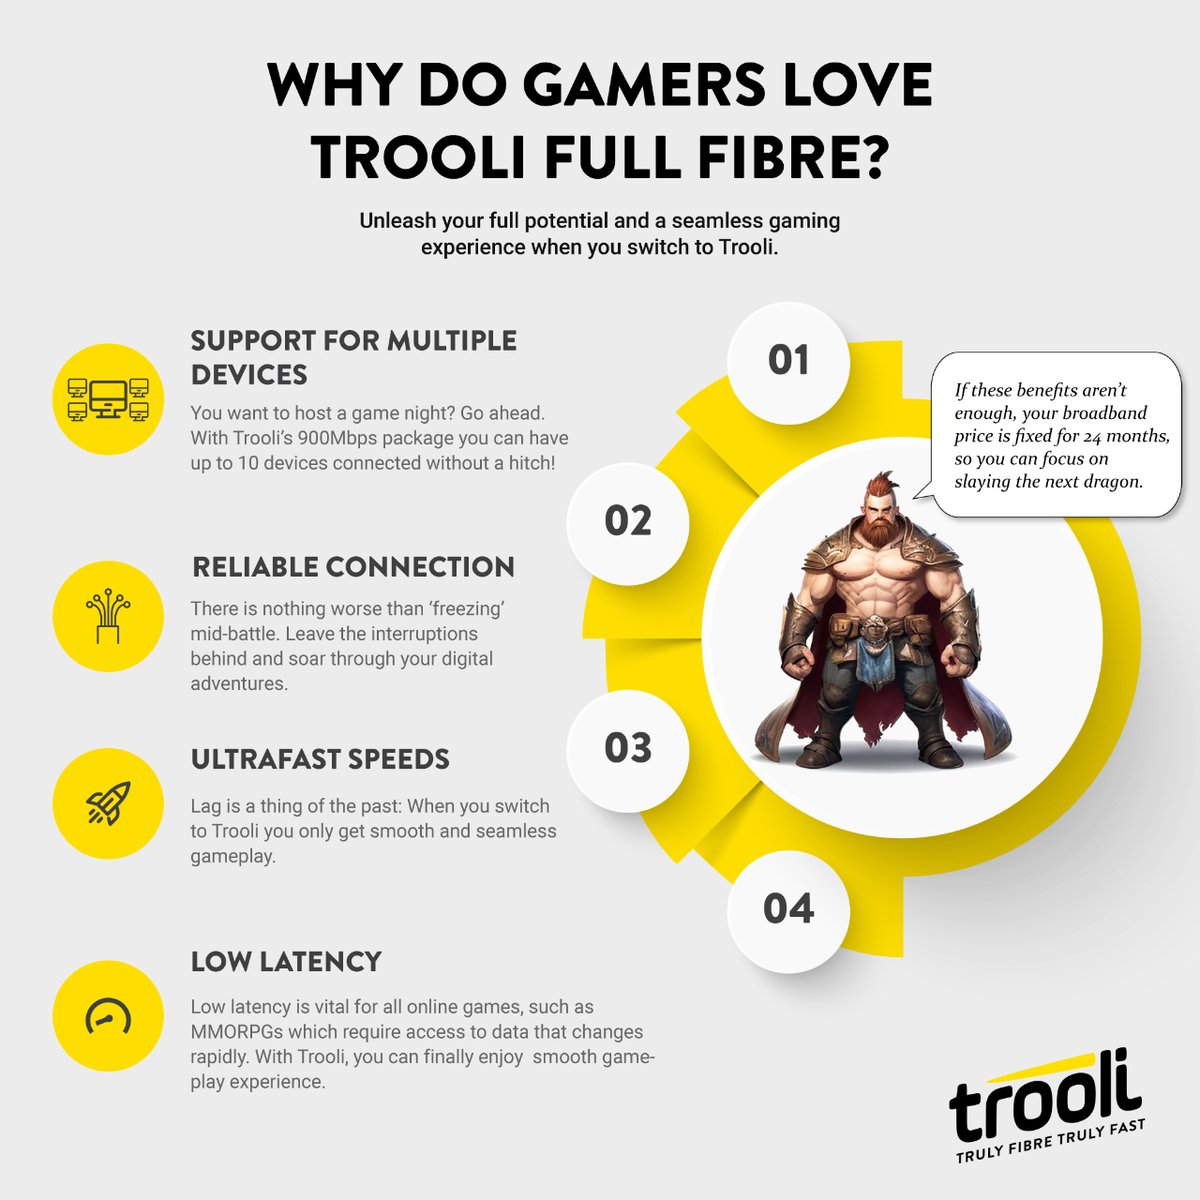 Why is Trooli the ultimate teammate for gamers? From ultrafast speeds to extremely low latency, discover how Trooli equips you to dominate the competition.
trooli.com

#fttp #gamingcommunity #gamingsetups #fullfibre #fibreoptic